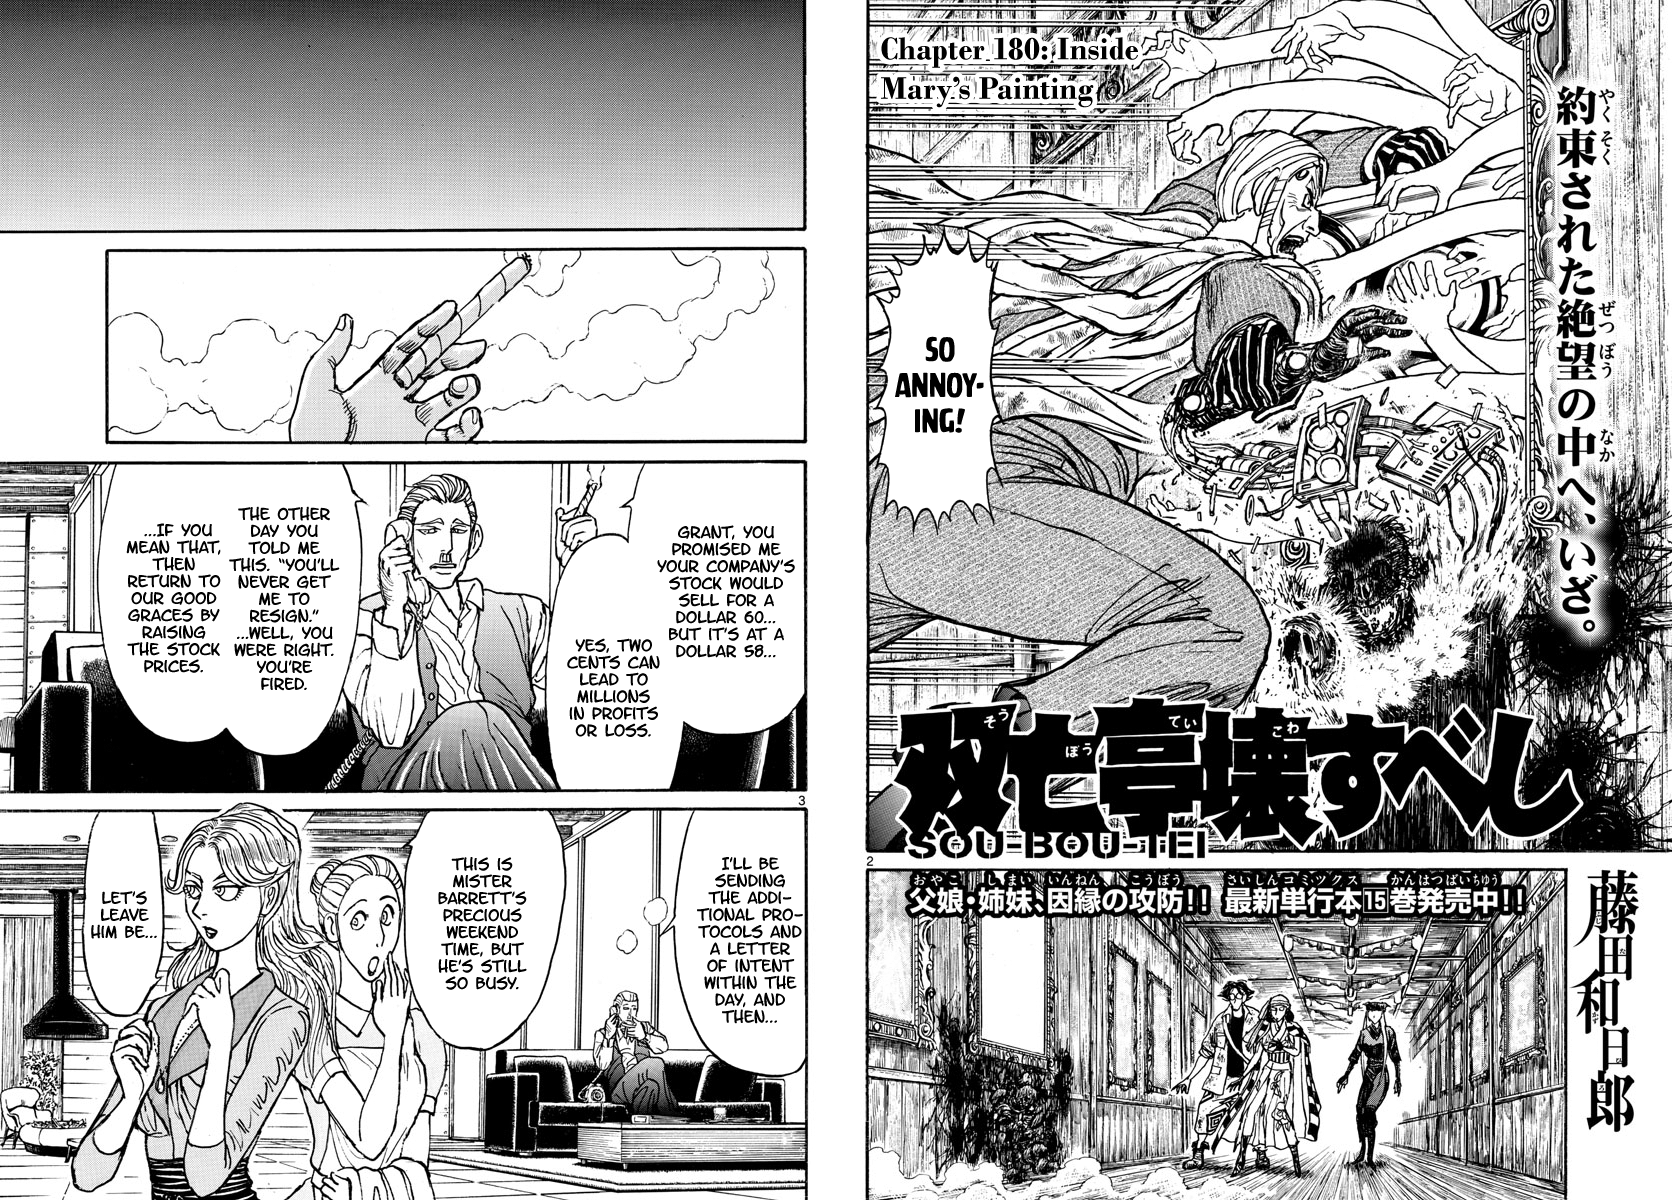 Souboutei Must Be Destroyed Vol.19 Chapter 180: Inside Mary's Painting - Picture 2